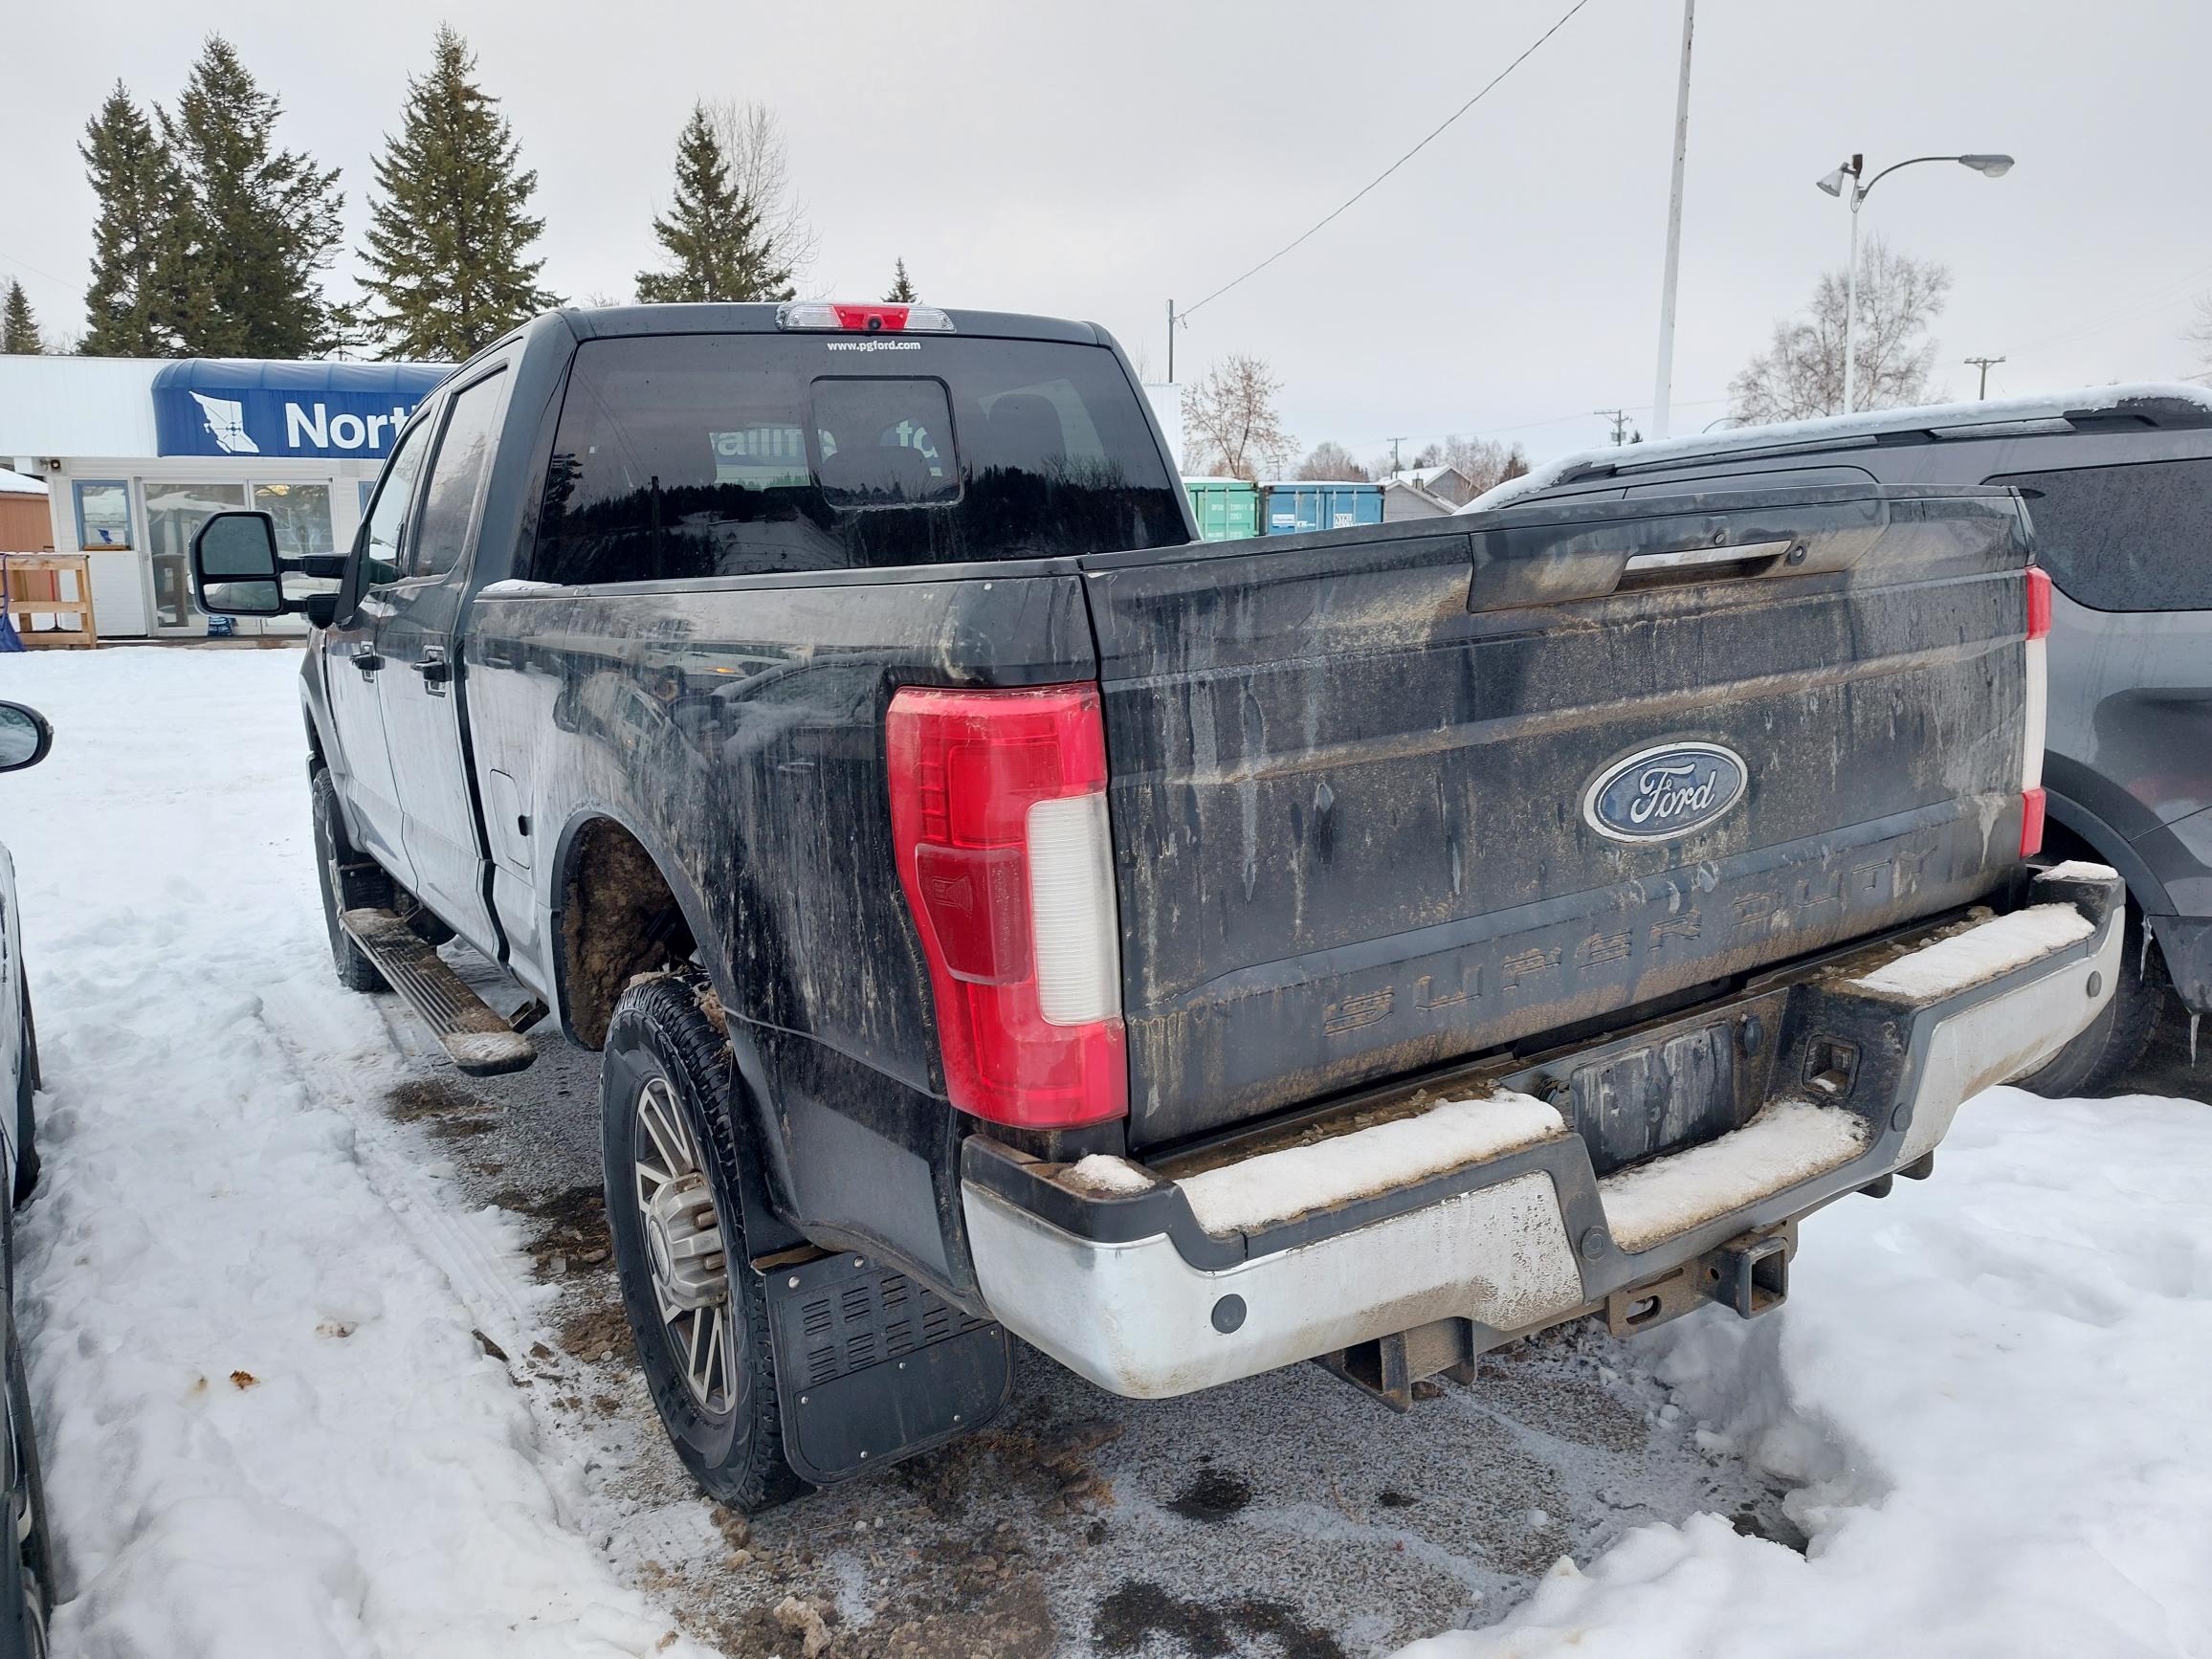 2018 Ford F350 #B-PG-0686 Located in Prince George